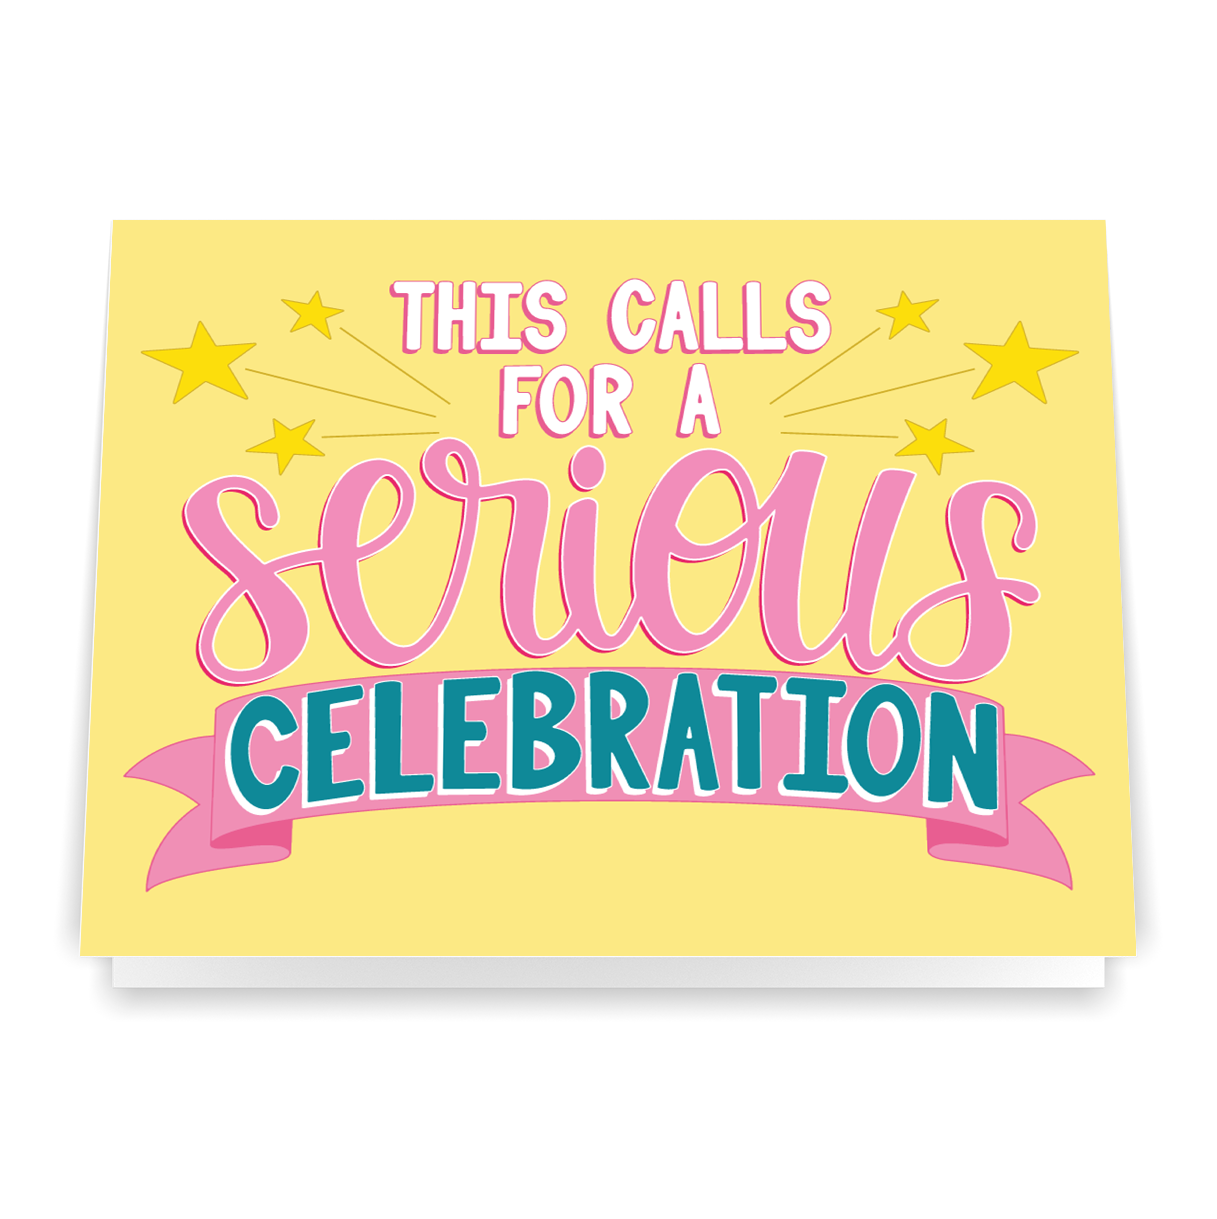 This Calls For a Serious Celebration - Greeting Card